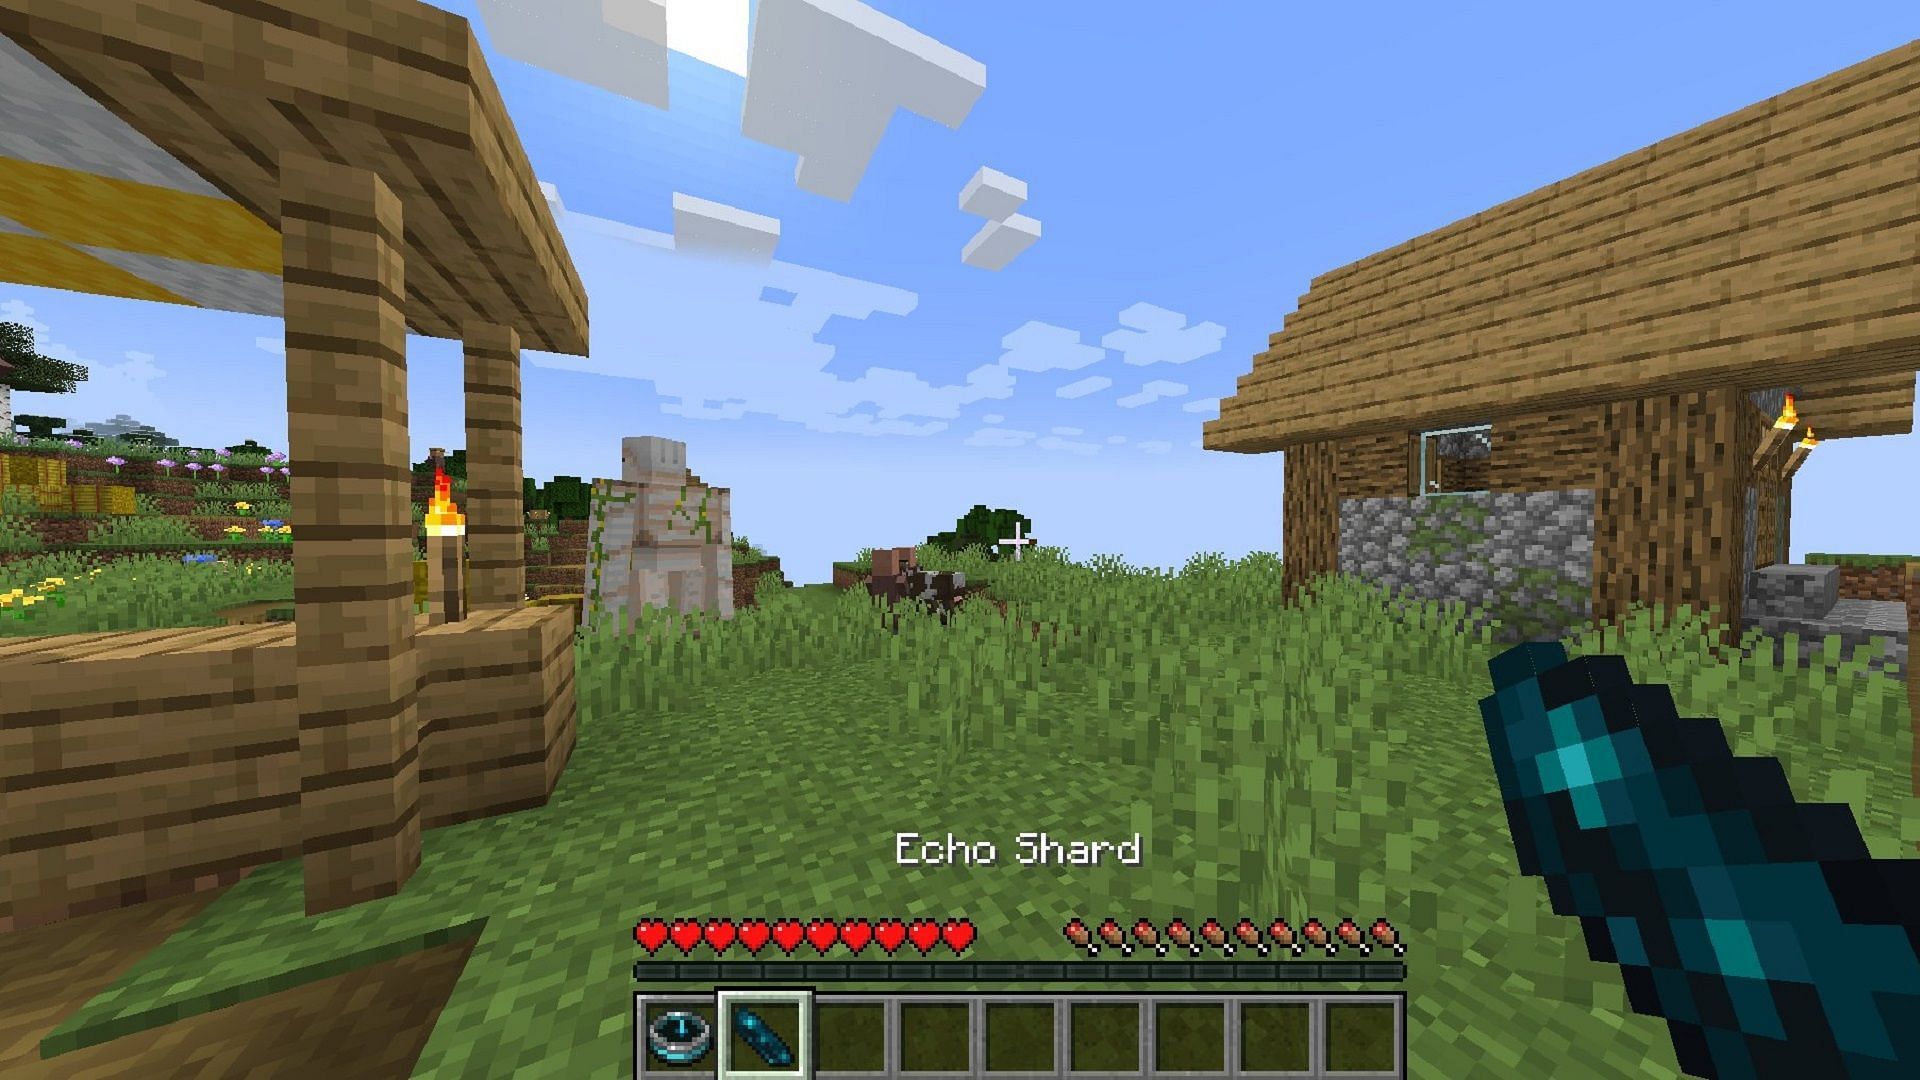 A player holding an Echo Shard in Minecraft (Image via Mojang)